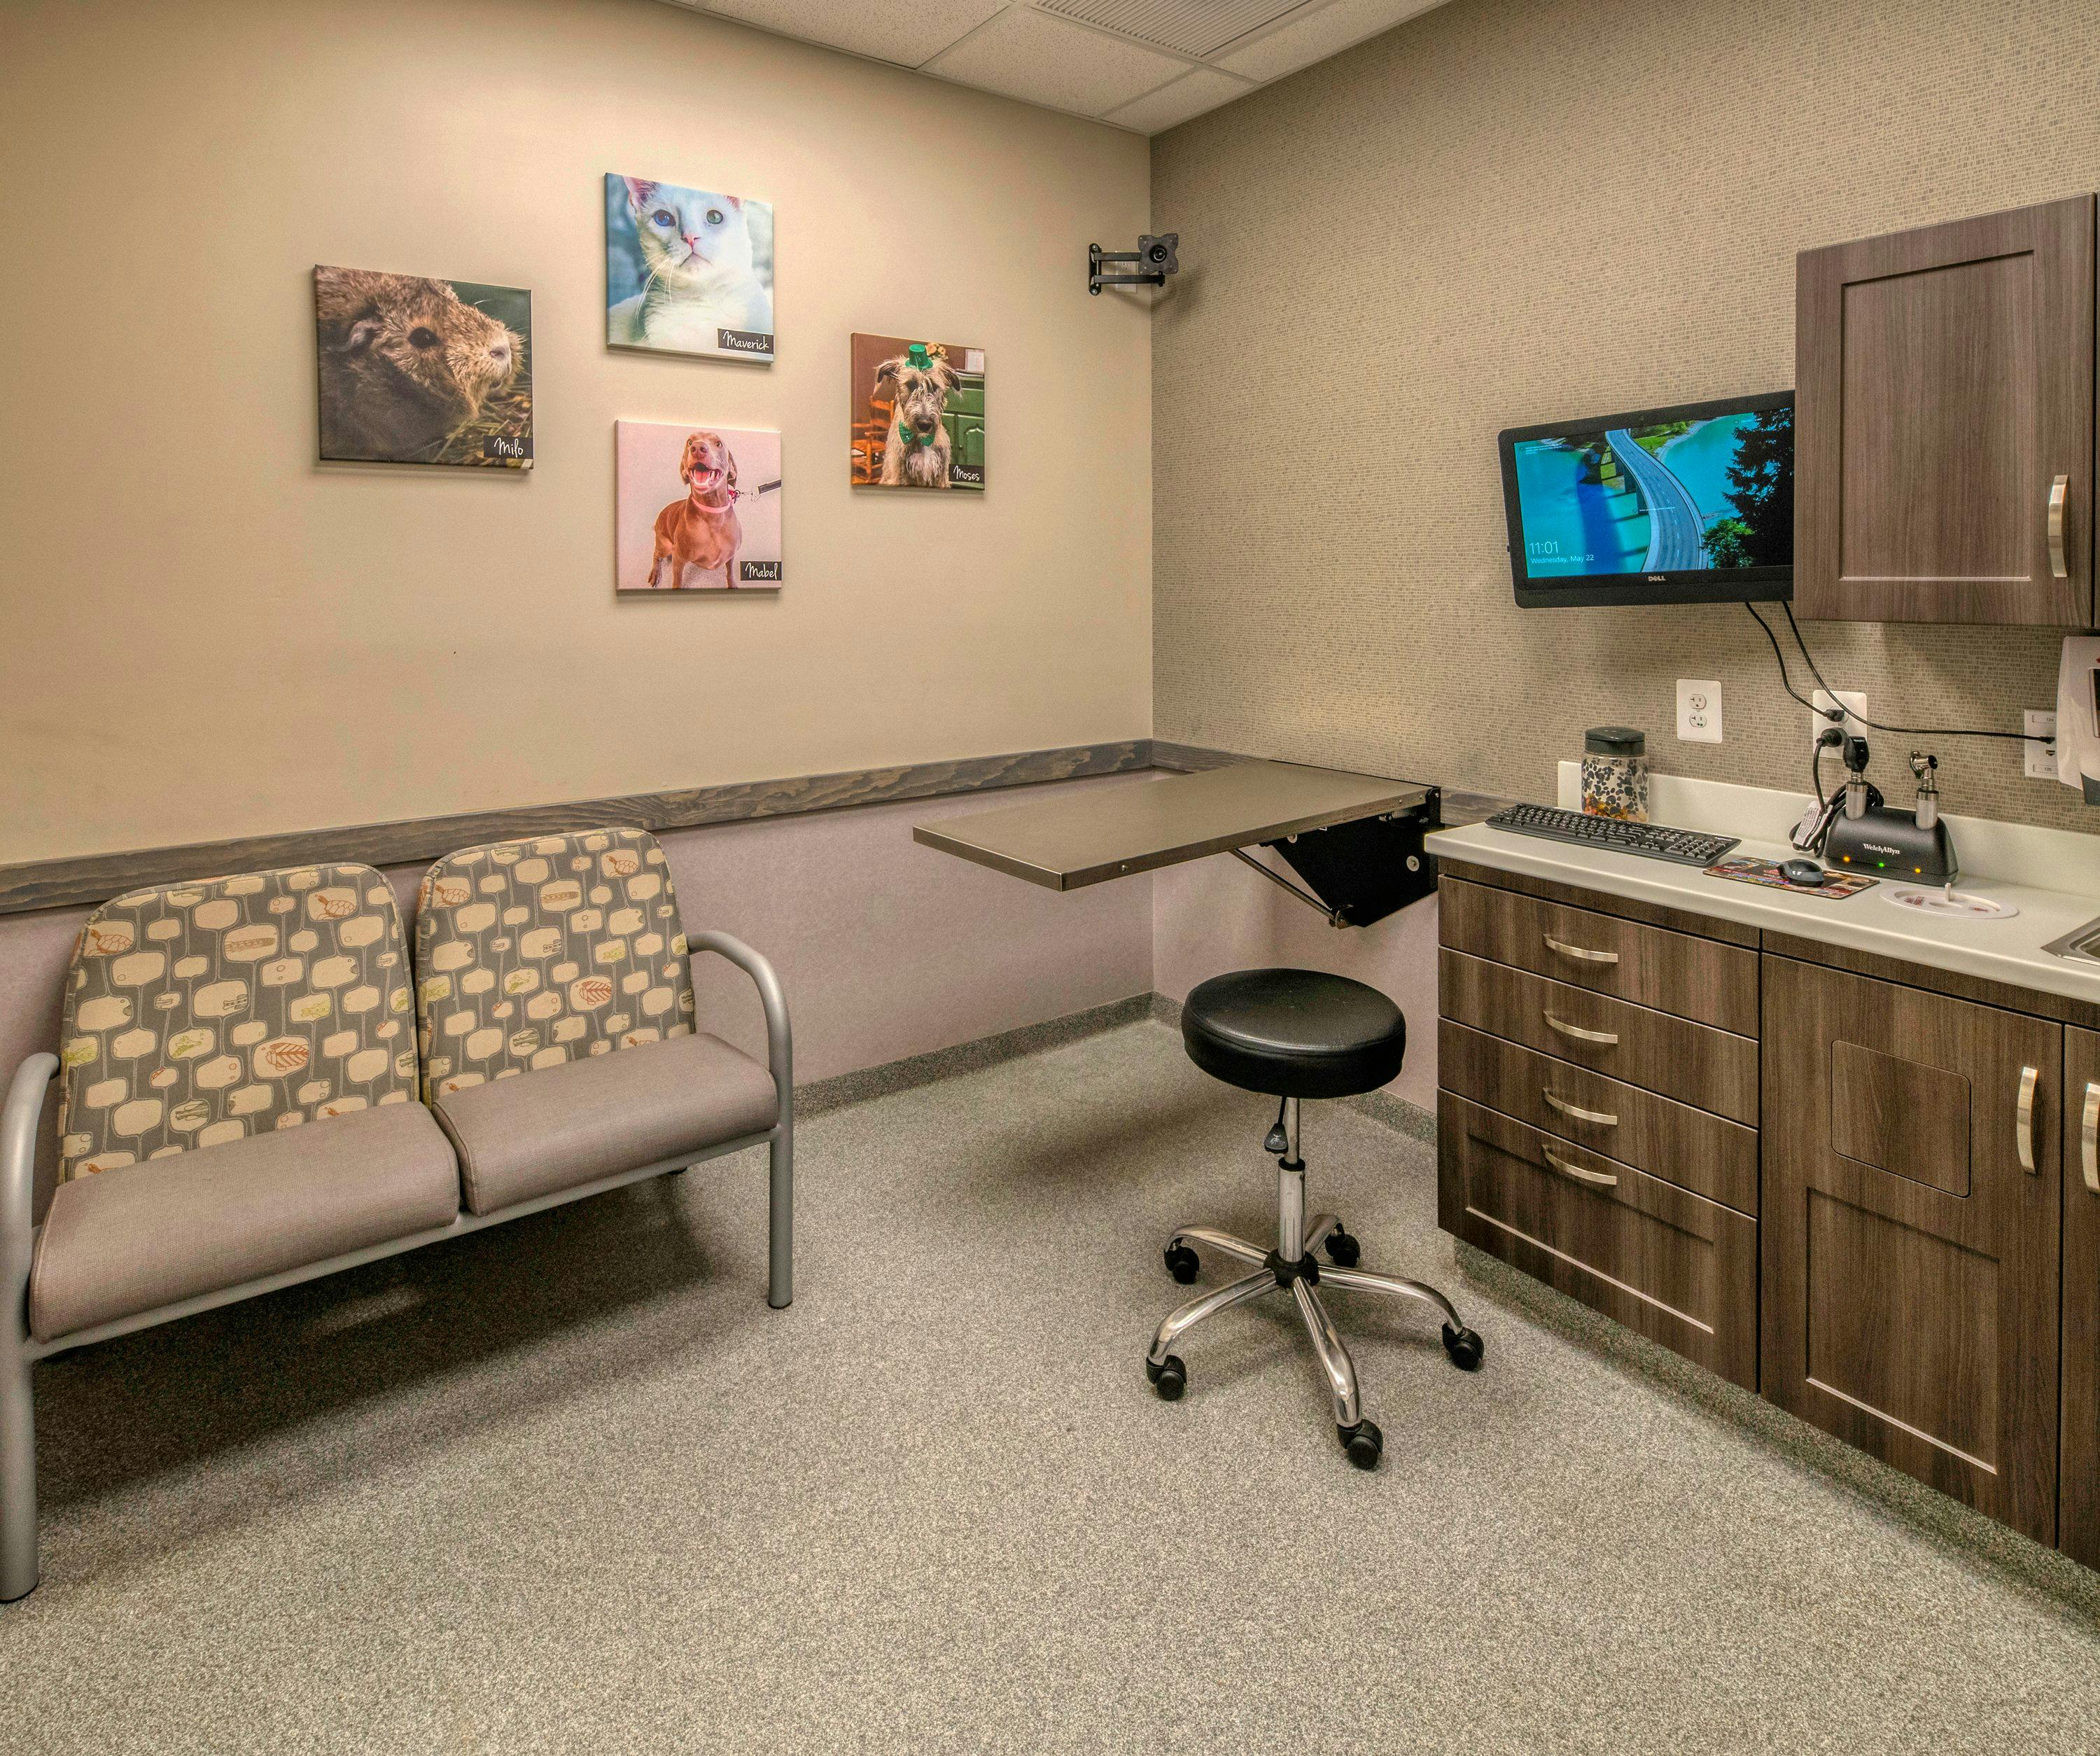 The hospital boasts 21 exam rooms. The rooms are neutral in color and decorated with photos of clients' pets that they submitted online, leading a personal touch to the space. 